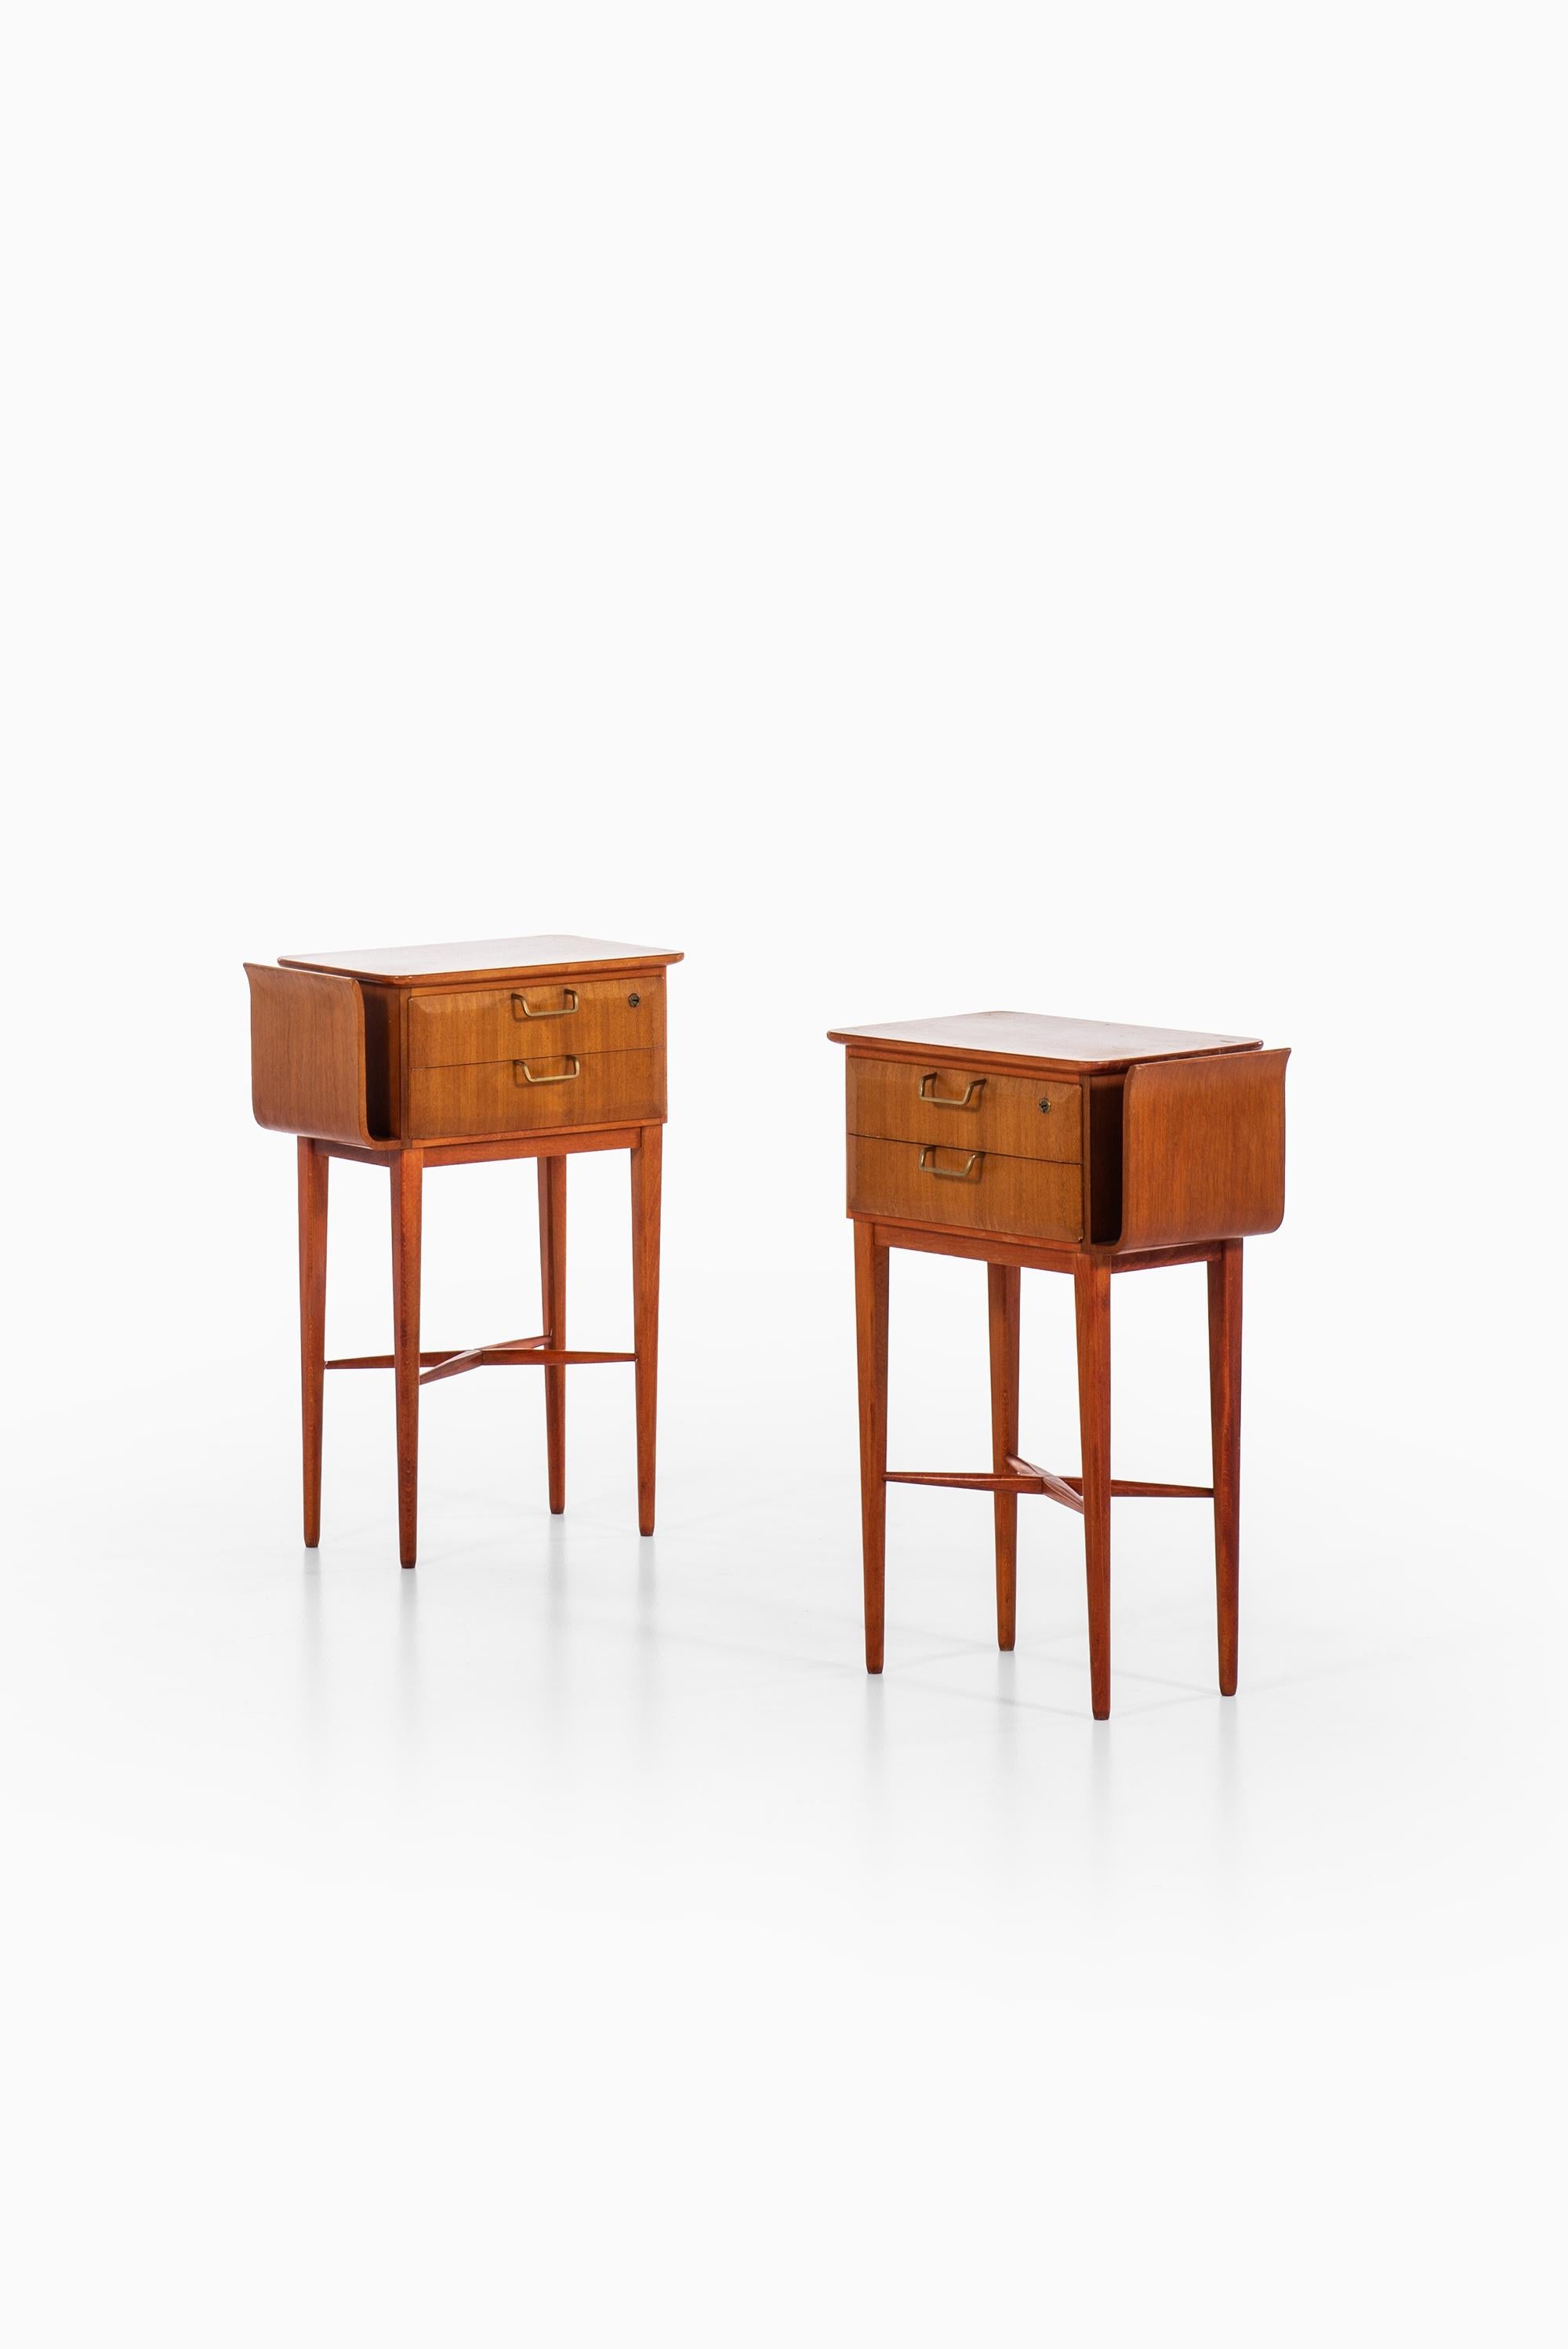 Very rare pair of bedside tables designed by Carl-Axel Acking. Produced by Bodafors in Sweden.